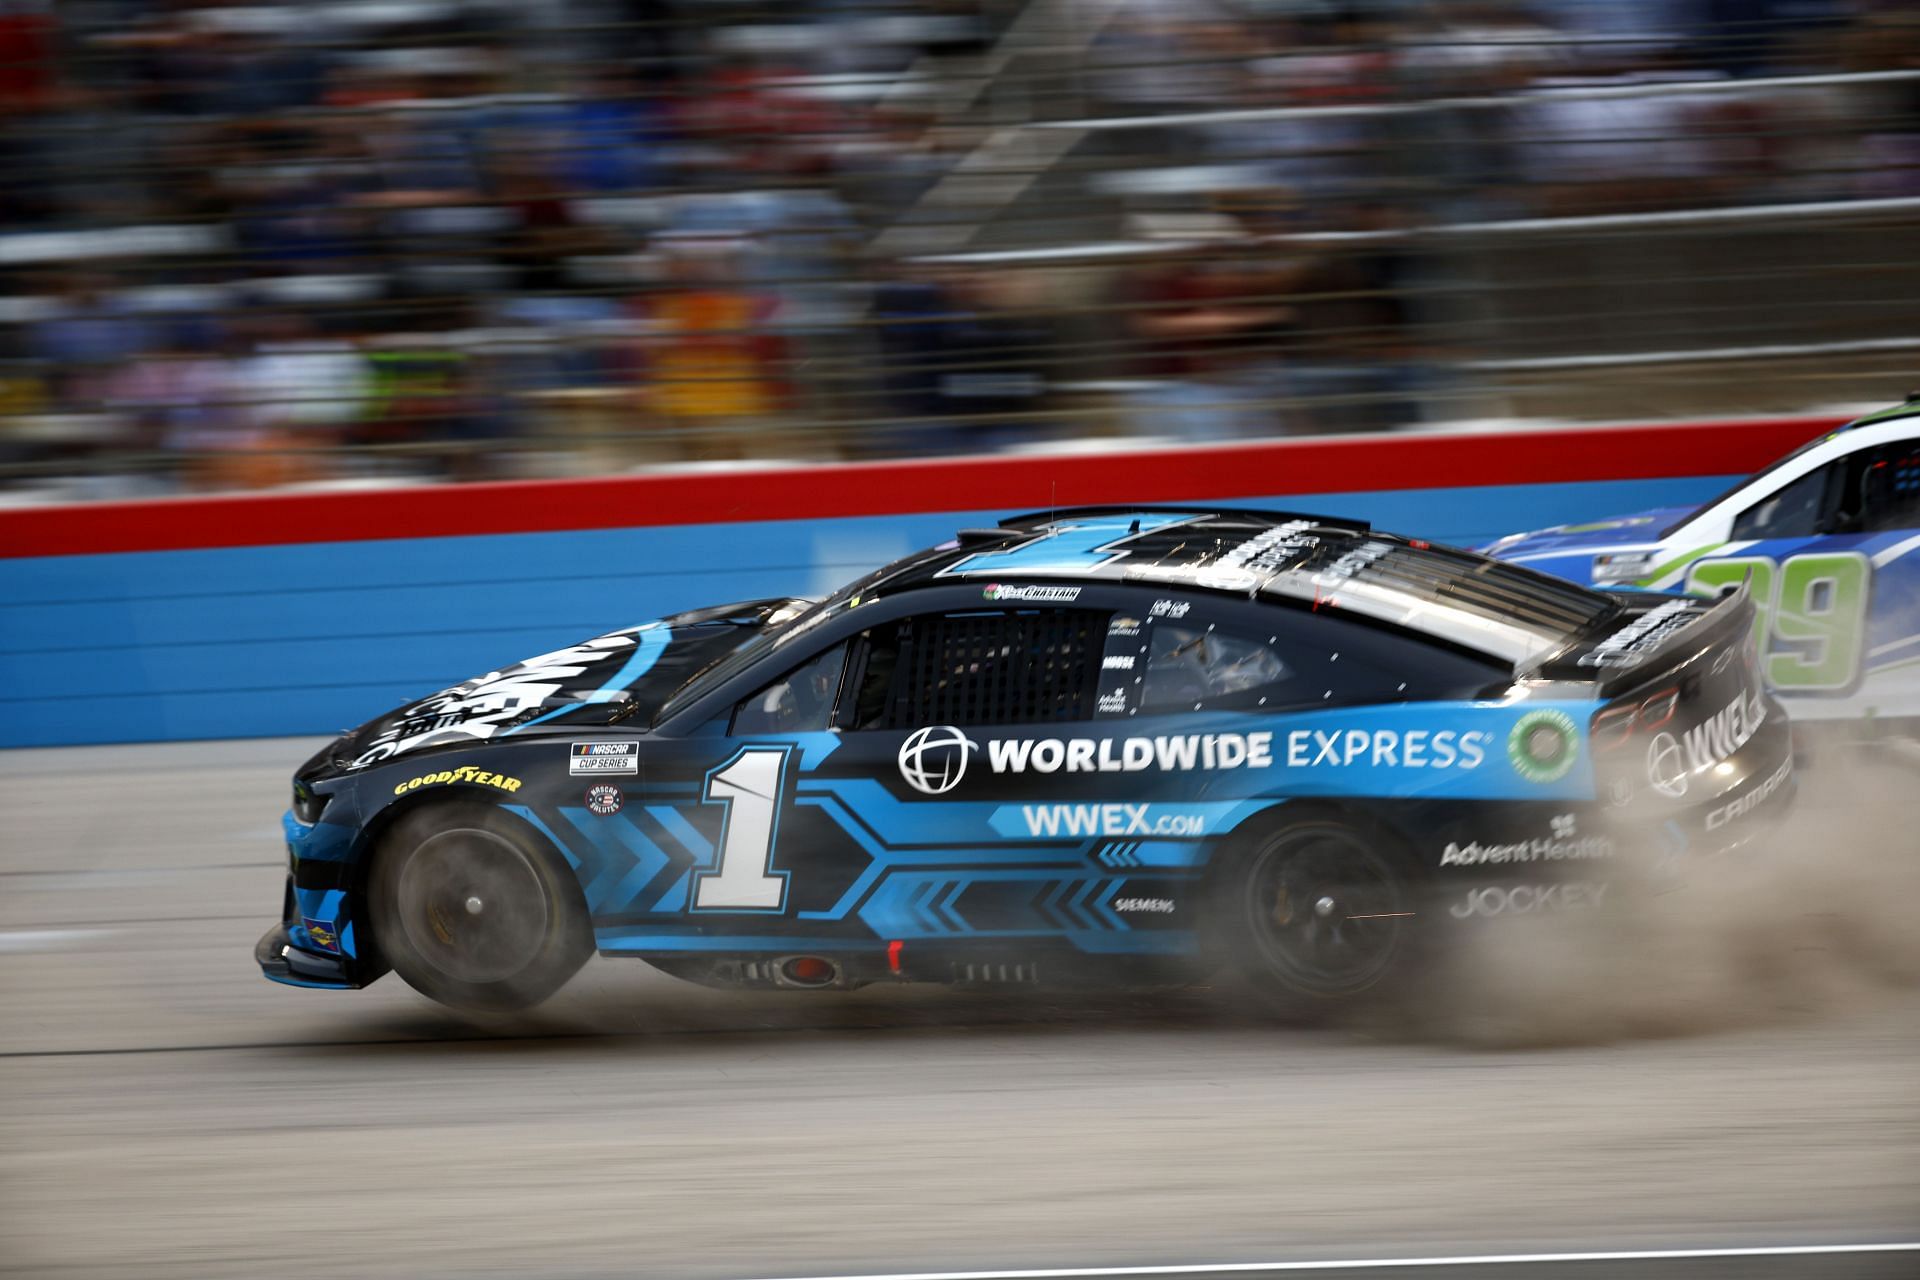 Ross Chastain spins after an on-track incident during the 2022 NASCAR Cup Series All-Star Race at Texas Motor Speedway in Fort Worth, Texas. (Photo by Jared C. Tilton/Getty Images)